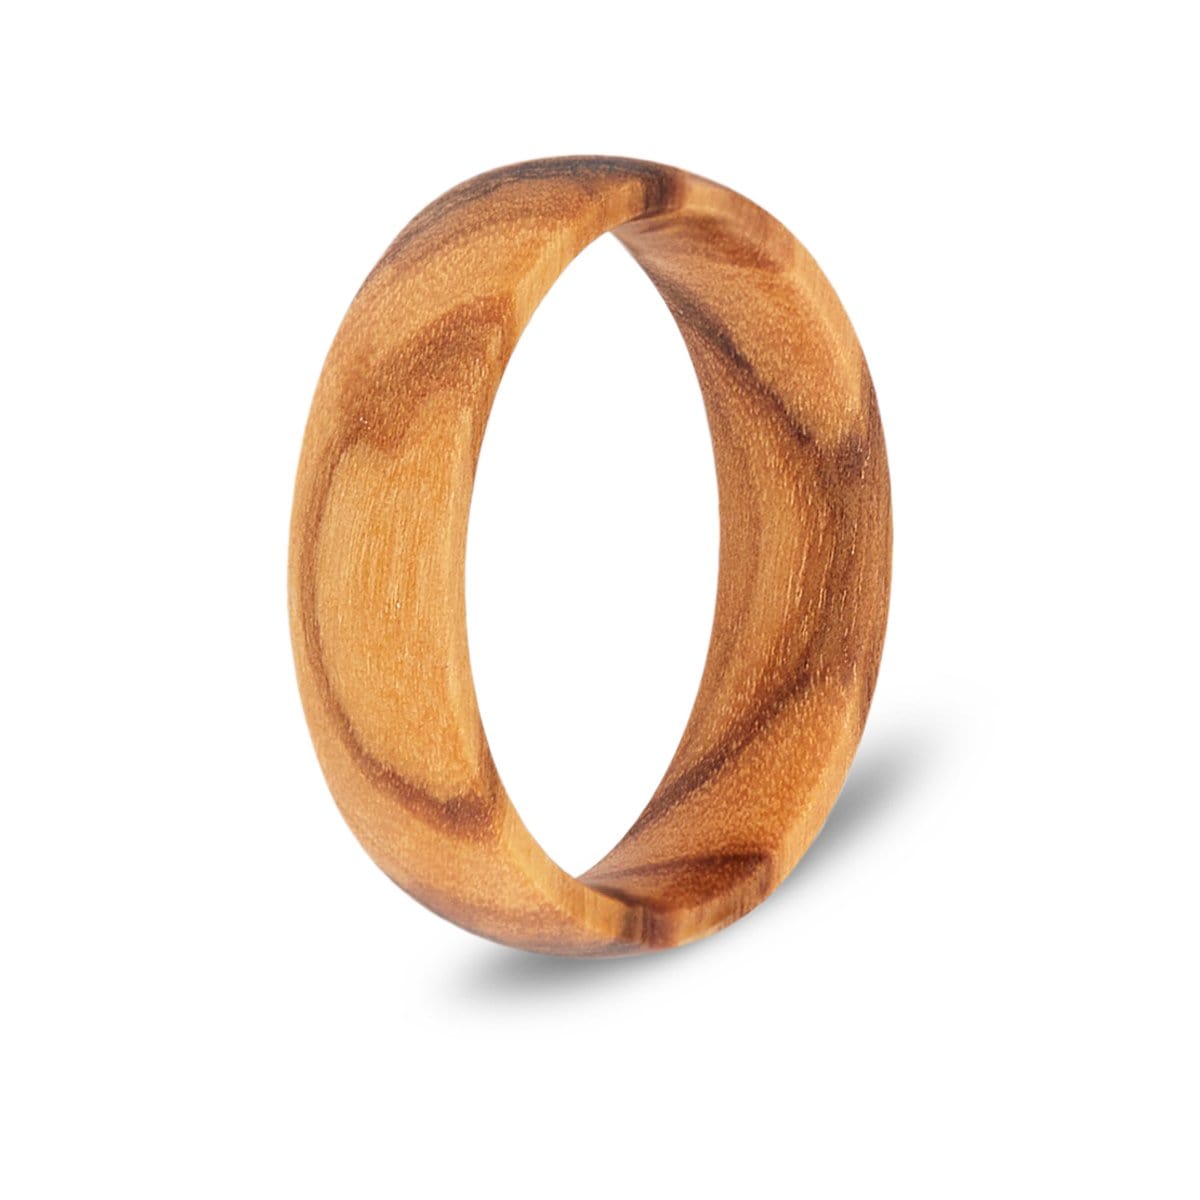 Kingwood & Olive Wood Ring With Abalone Guitar Strings, Wooden Rings, Mens  Wood Rings, Wooden Wedding Rings, Bent Wood Rings, Wooden Ring 